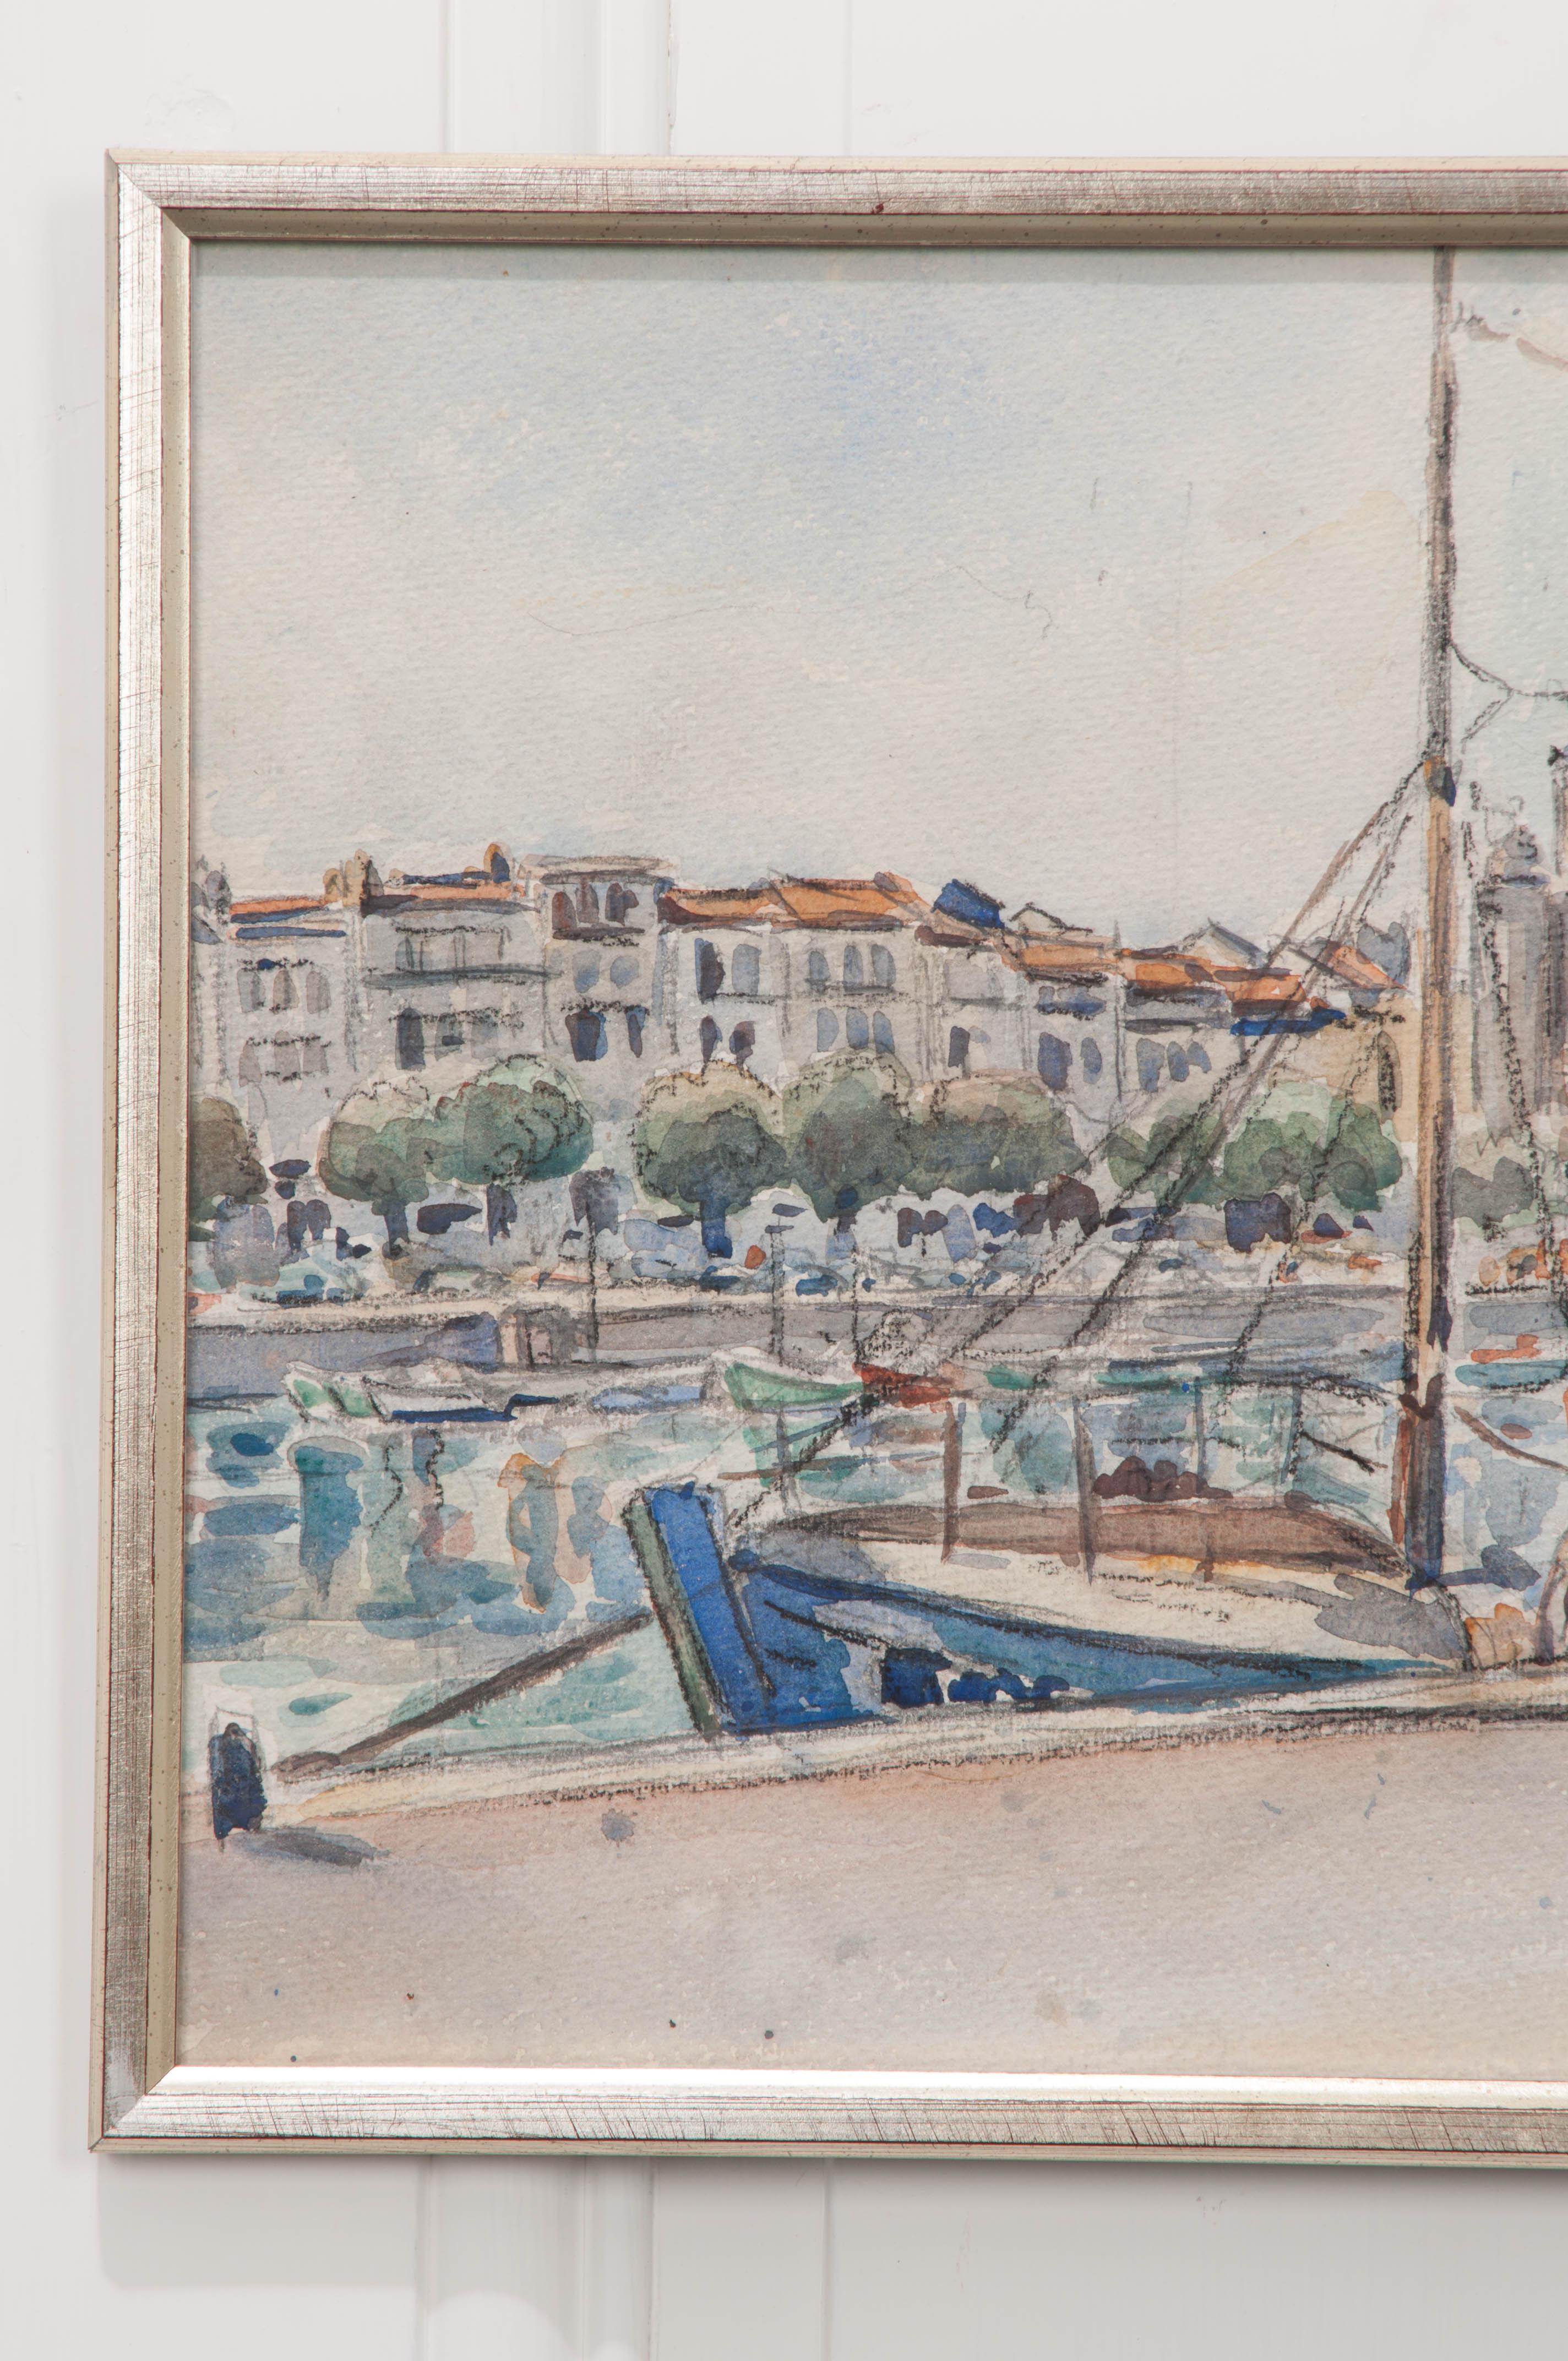 This charming watercolor on paper, circa 1940s, depicts two figures in a seaside village standing on a dock with a sailboat. Its size makes it perfect for a shelf or grouped on a wall with other small works of art.